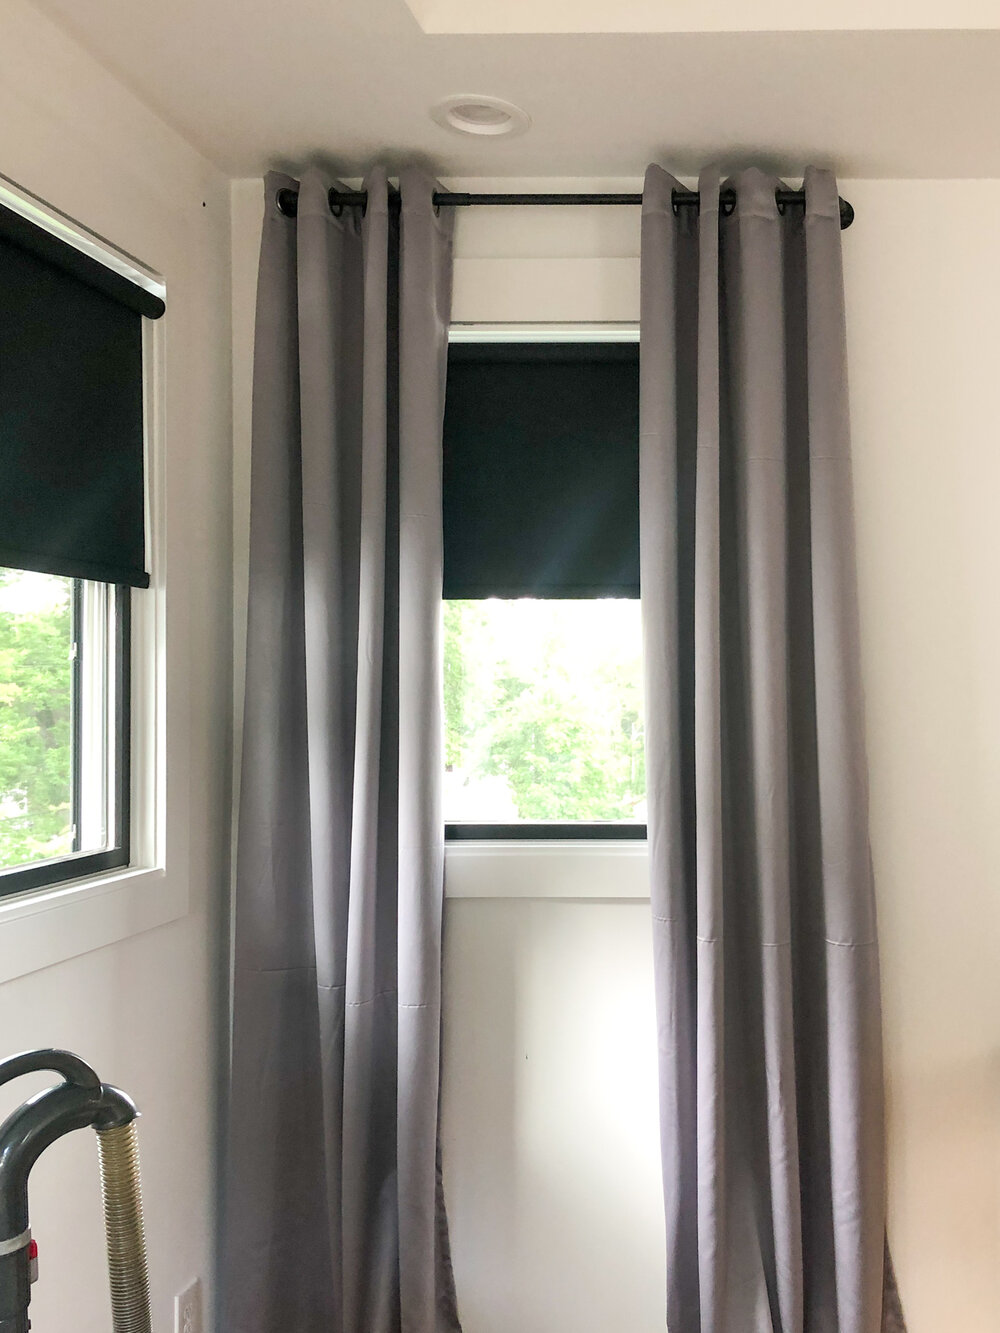 Installing secure and even curtain rods